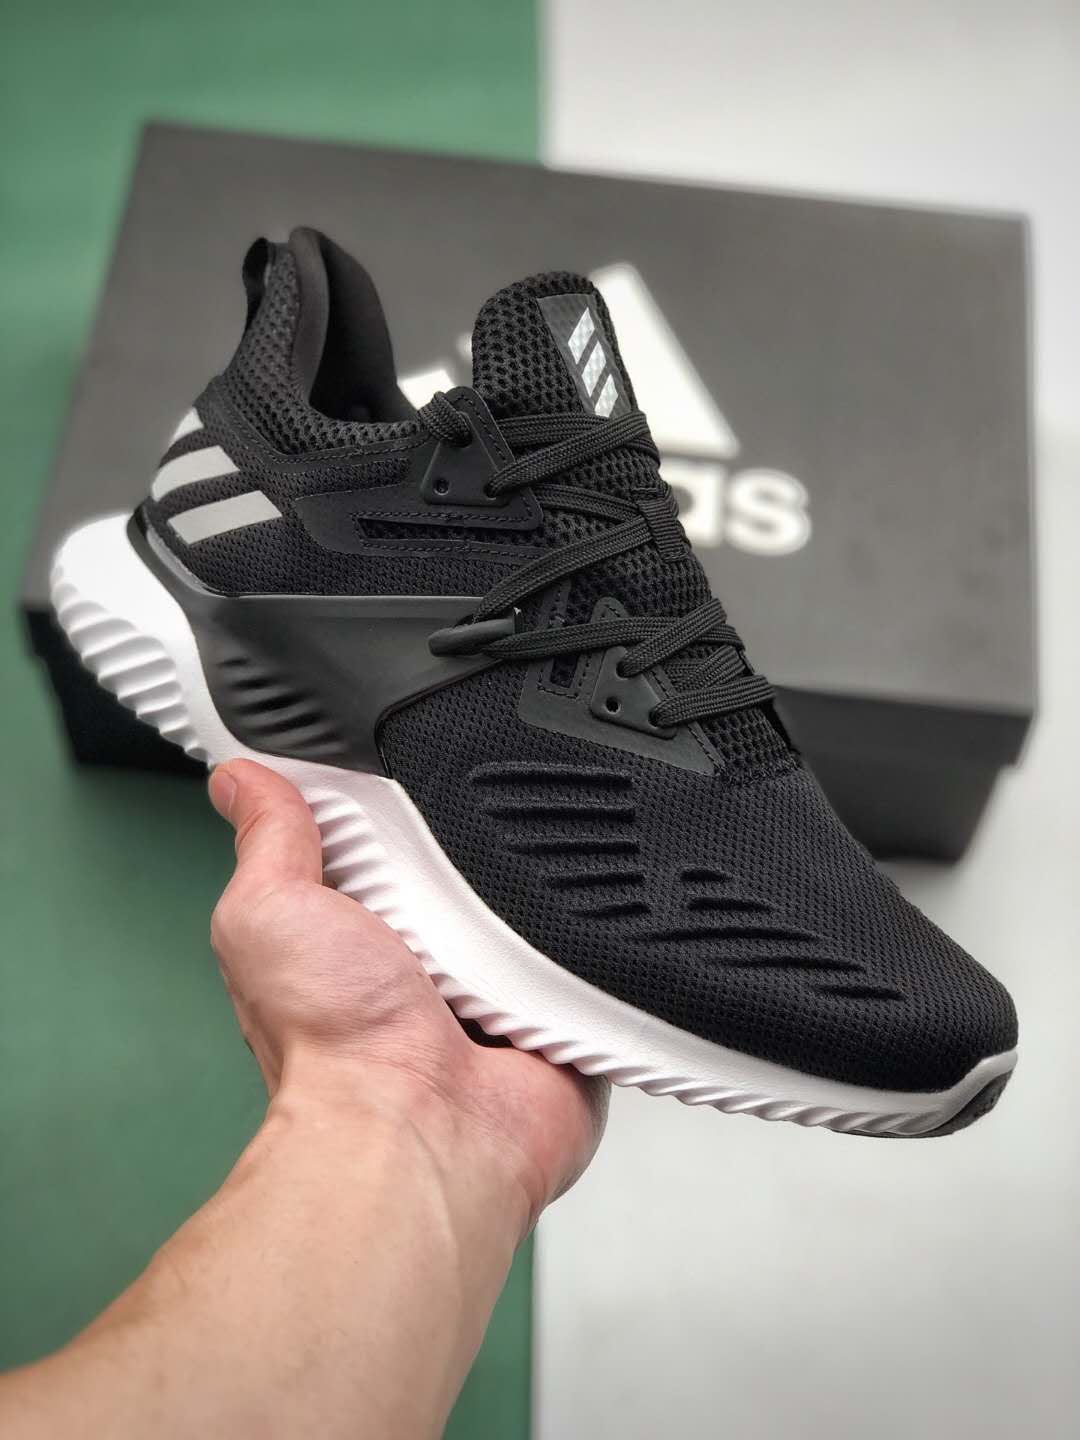 Adidas Alphabounce Beyond 2 BB7568 - Top Performance Athletic Shoes